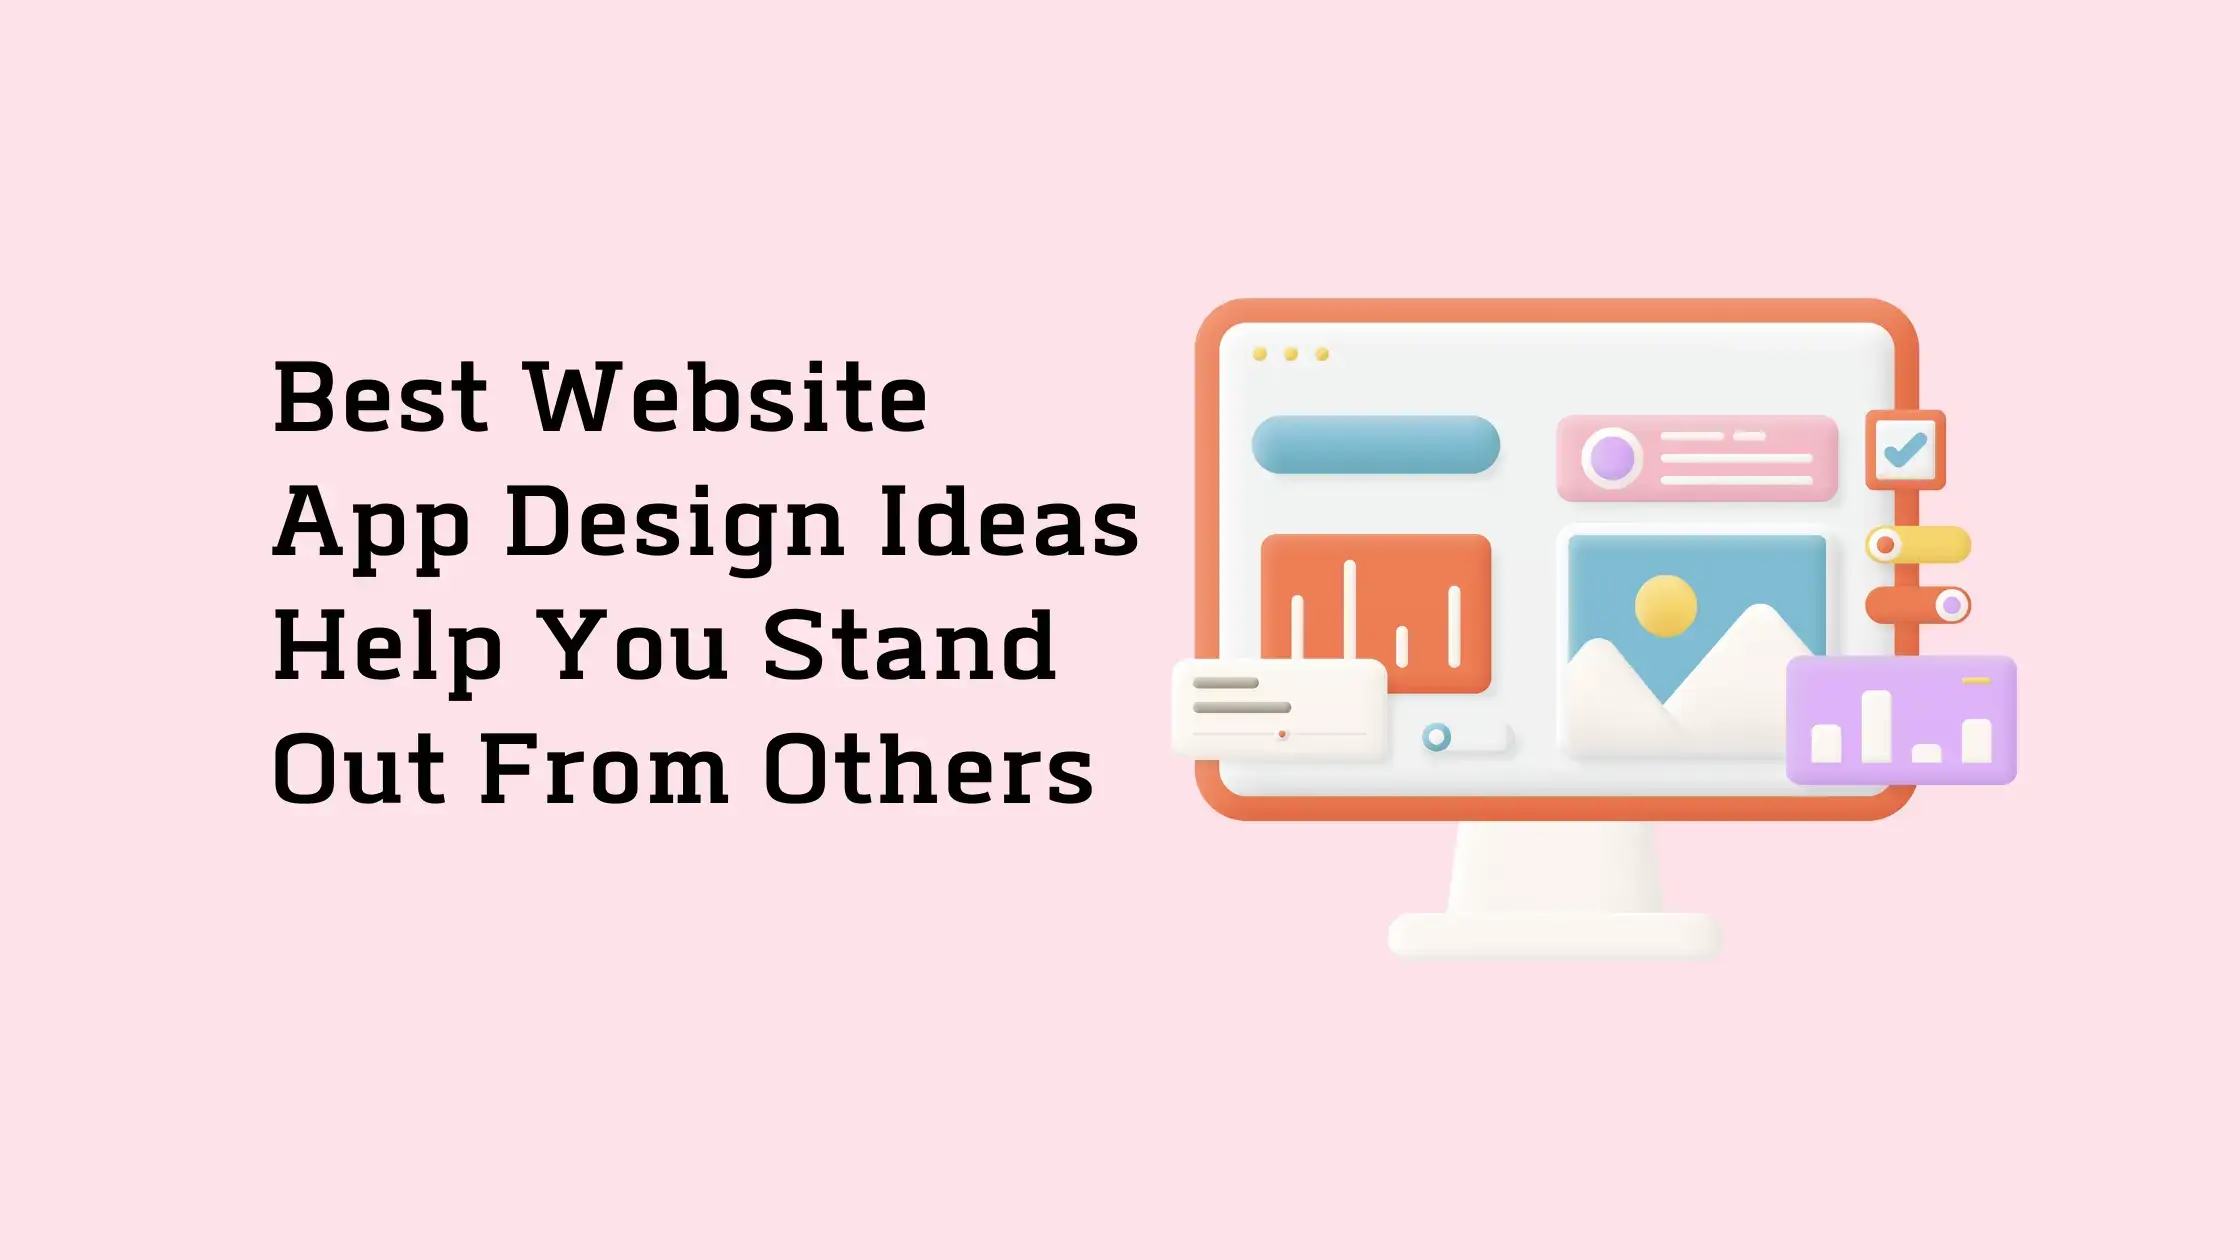 Best Website App Design Ideas Help You Stand Out From Others